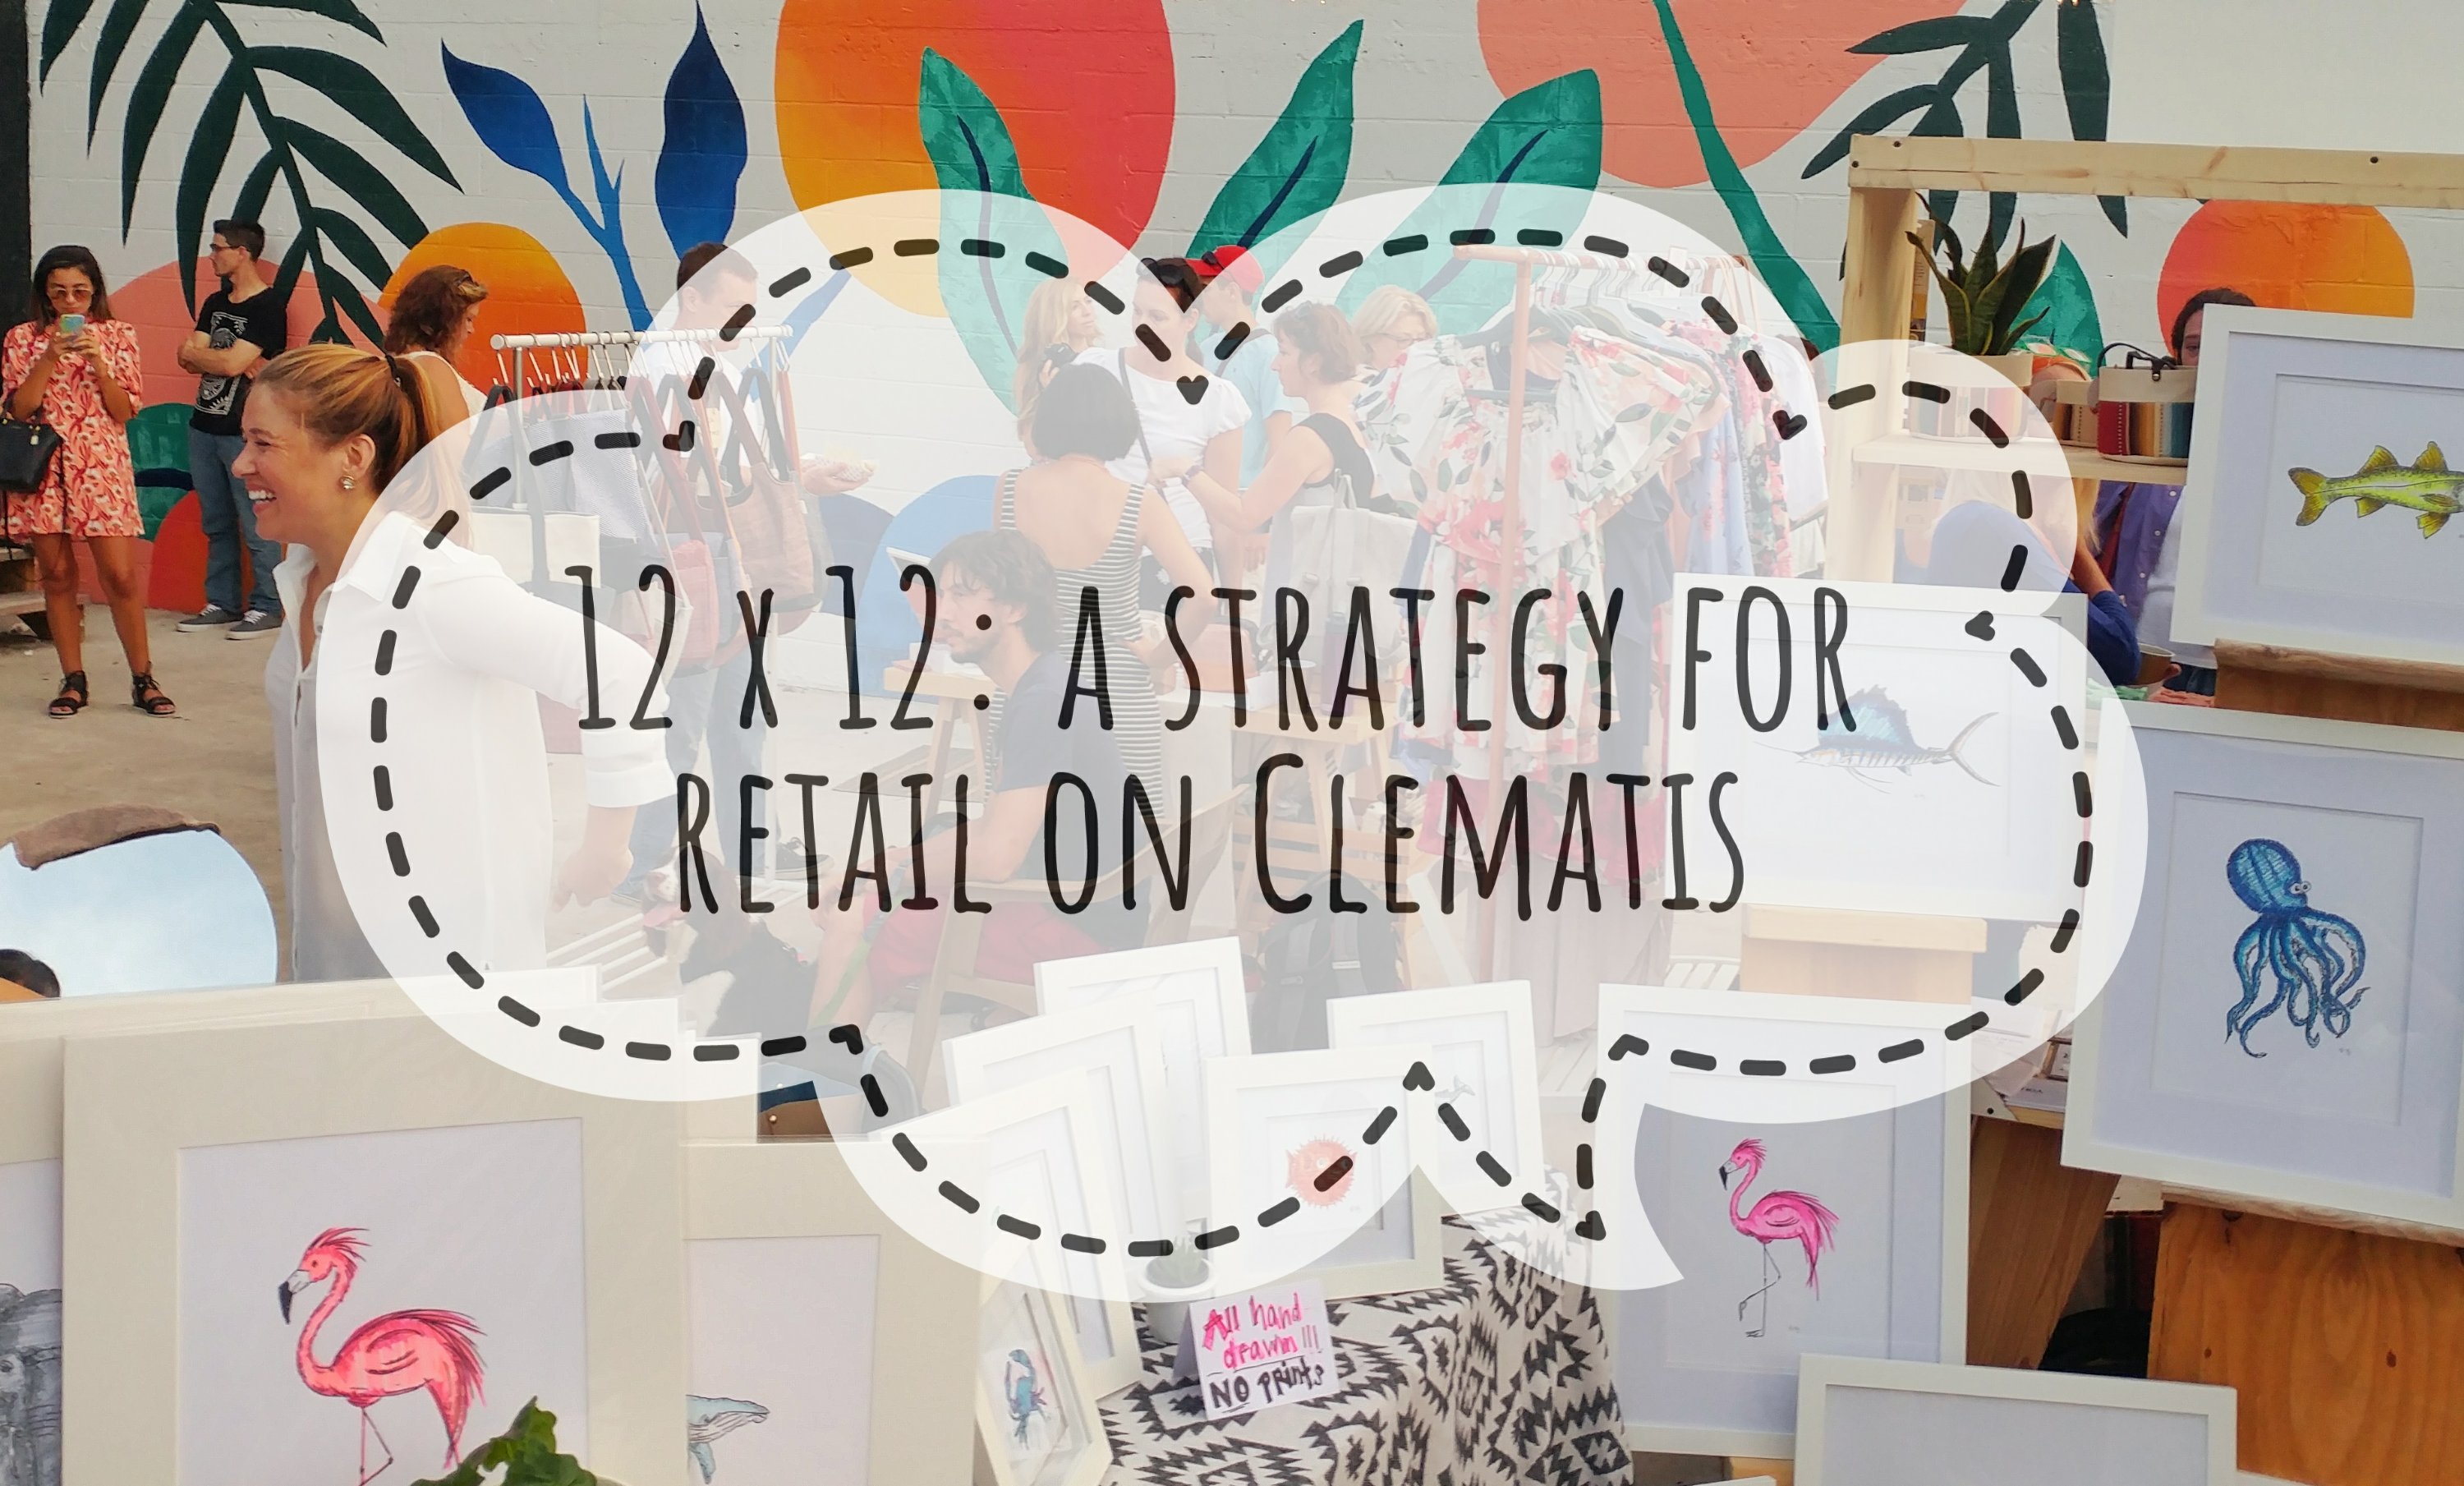 “12 x 12” West Palm Beach’s strategy for retail on Clematis Street